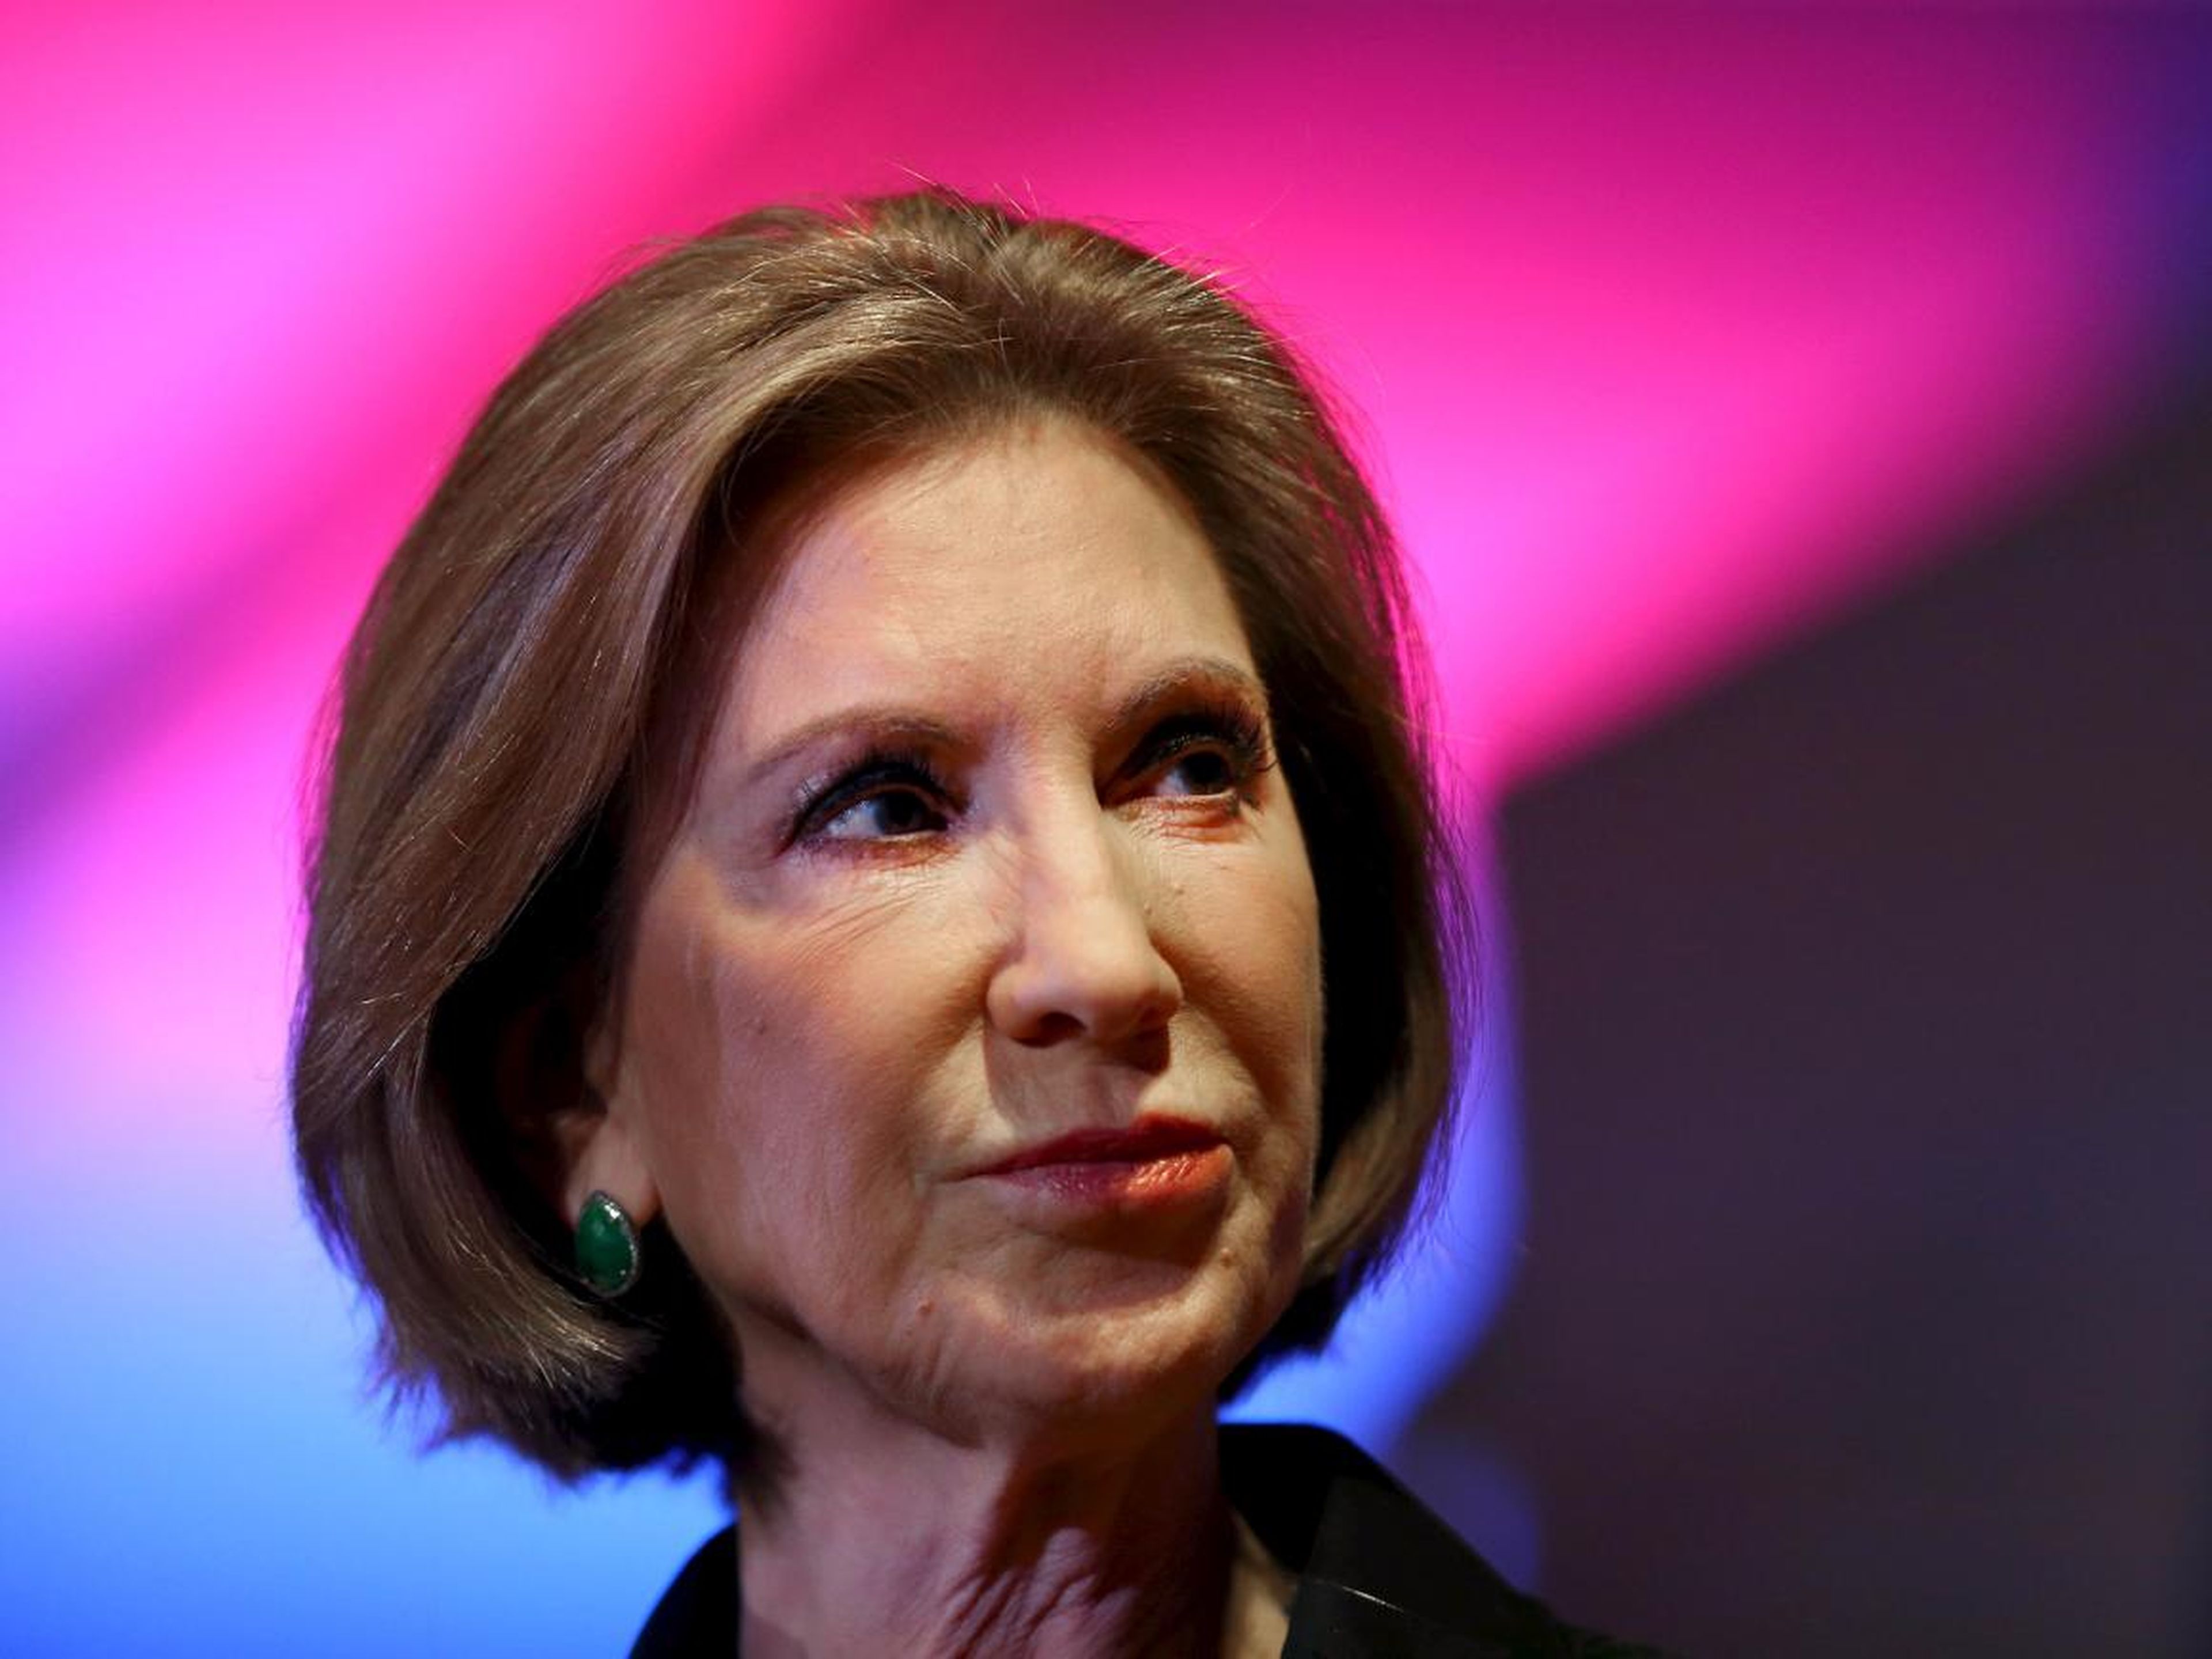 Carly Fiorina was the first woman to lead a fortune 500 company.